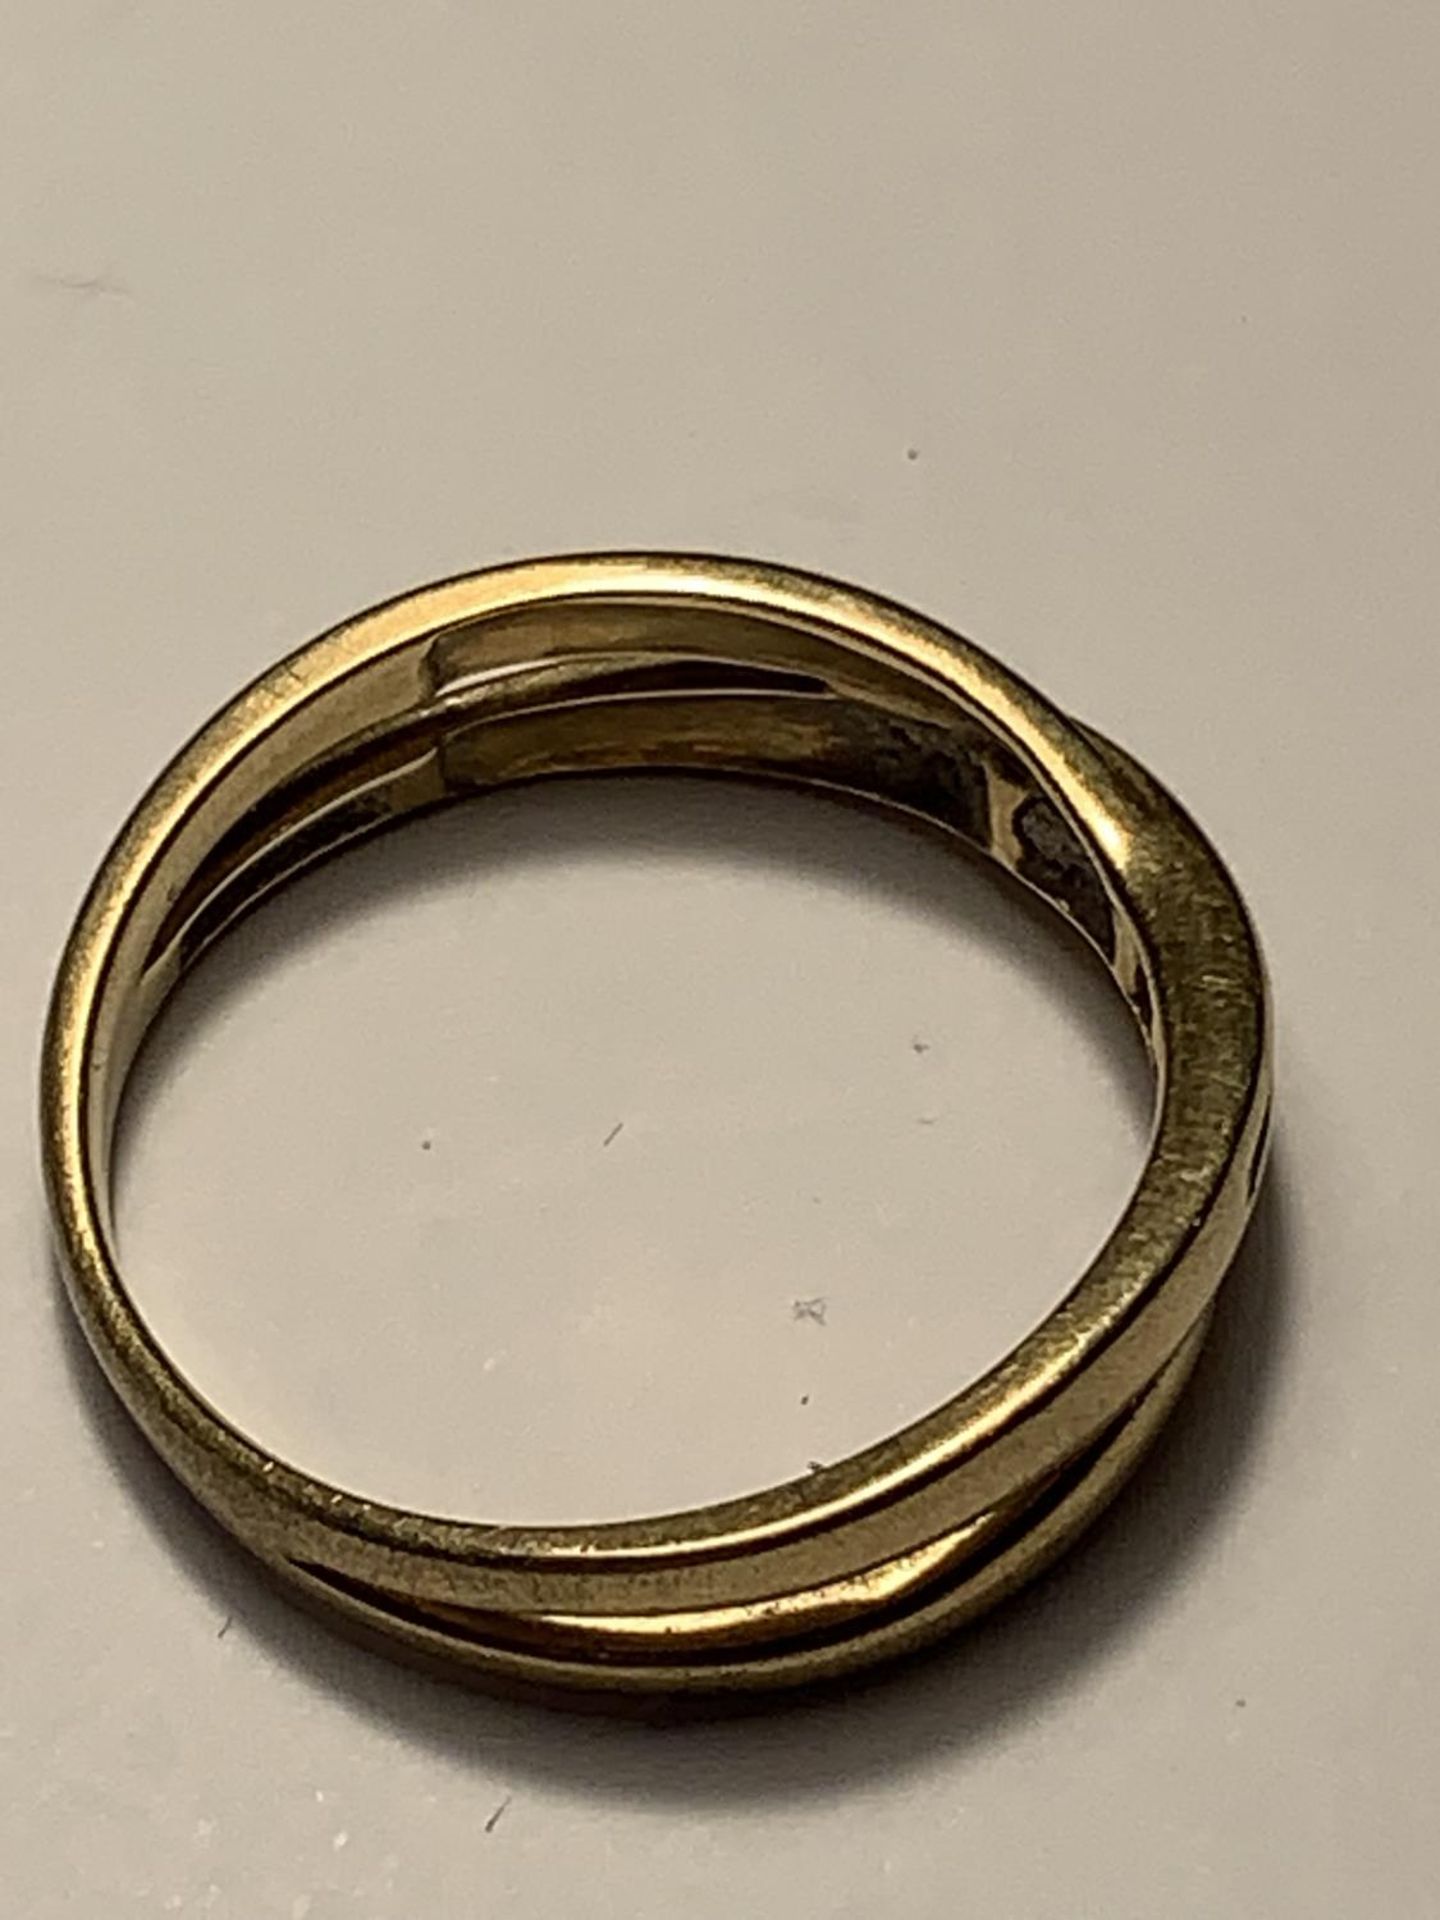 A 9 CARAT GOLD RING IN A CROSSOVER DESIGN SIZE N/0 - Image 3 of 3